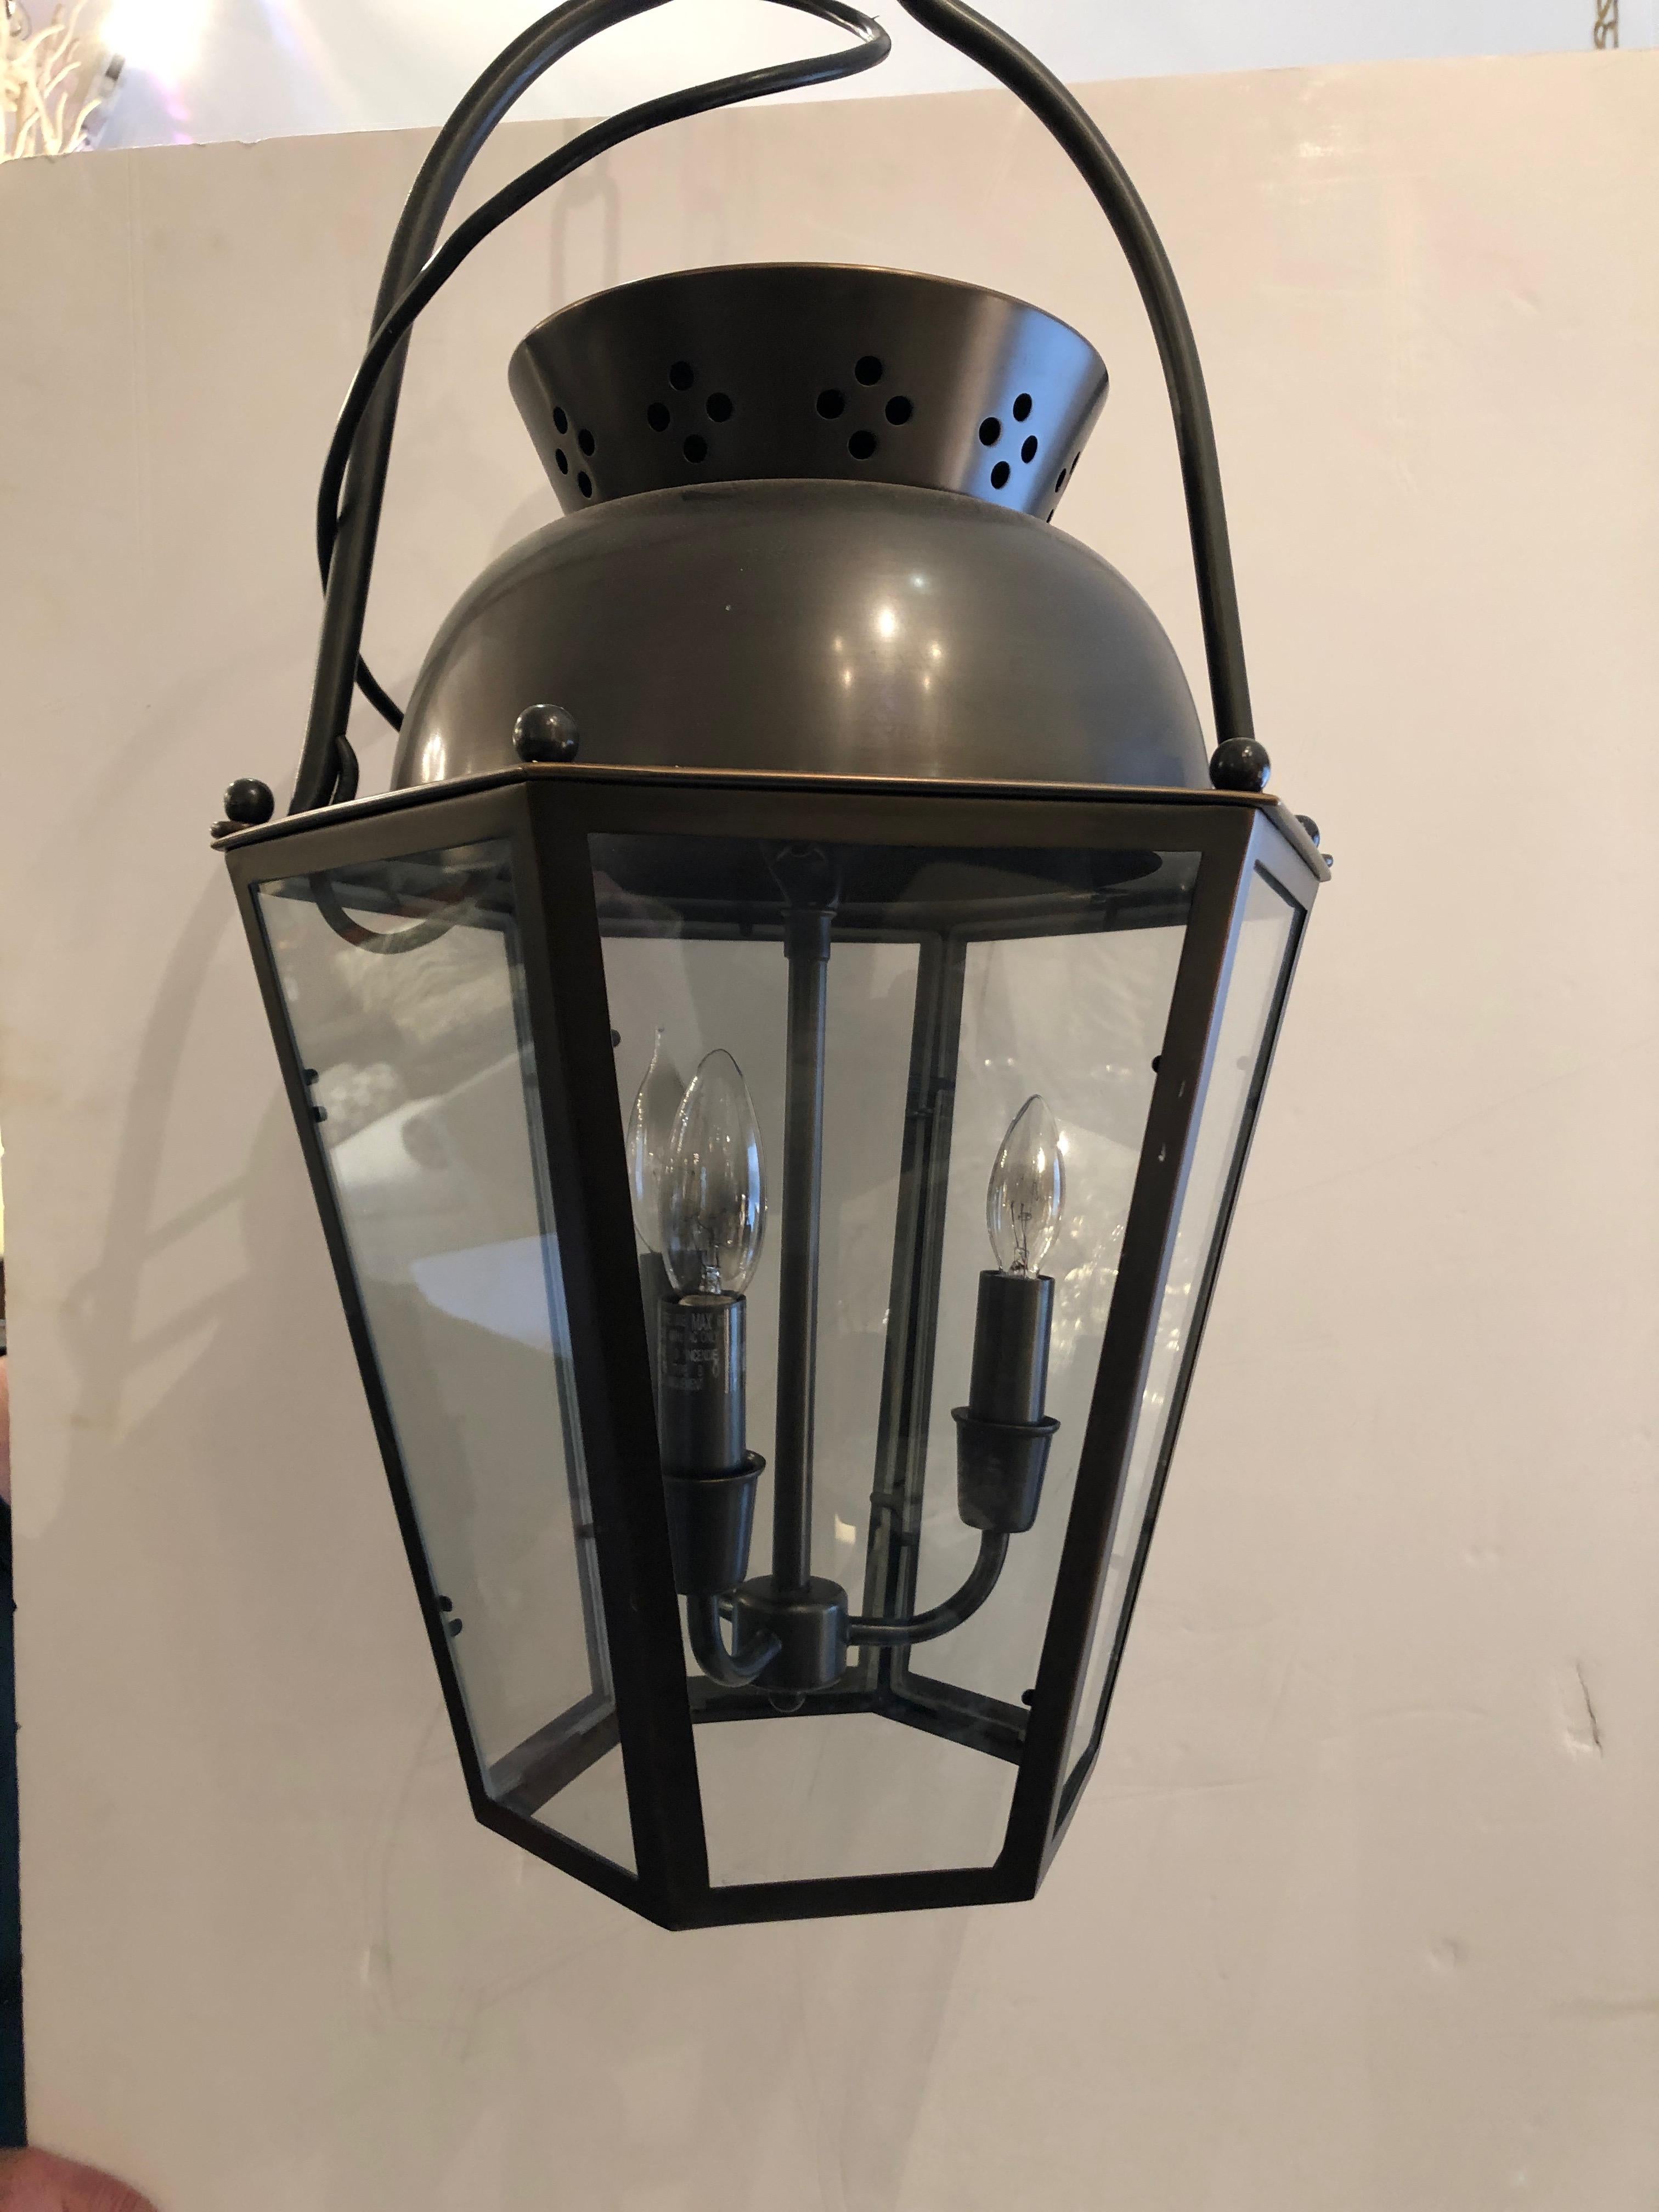 Great looking classic large lantern in a bronze finish having 6 sides and 3 lights inside.